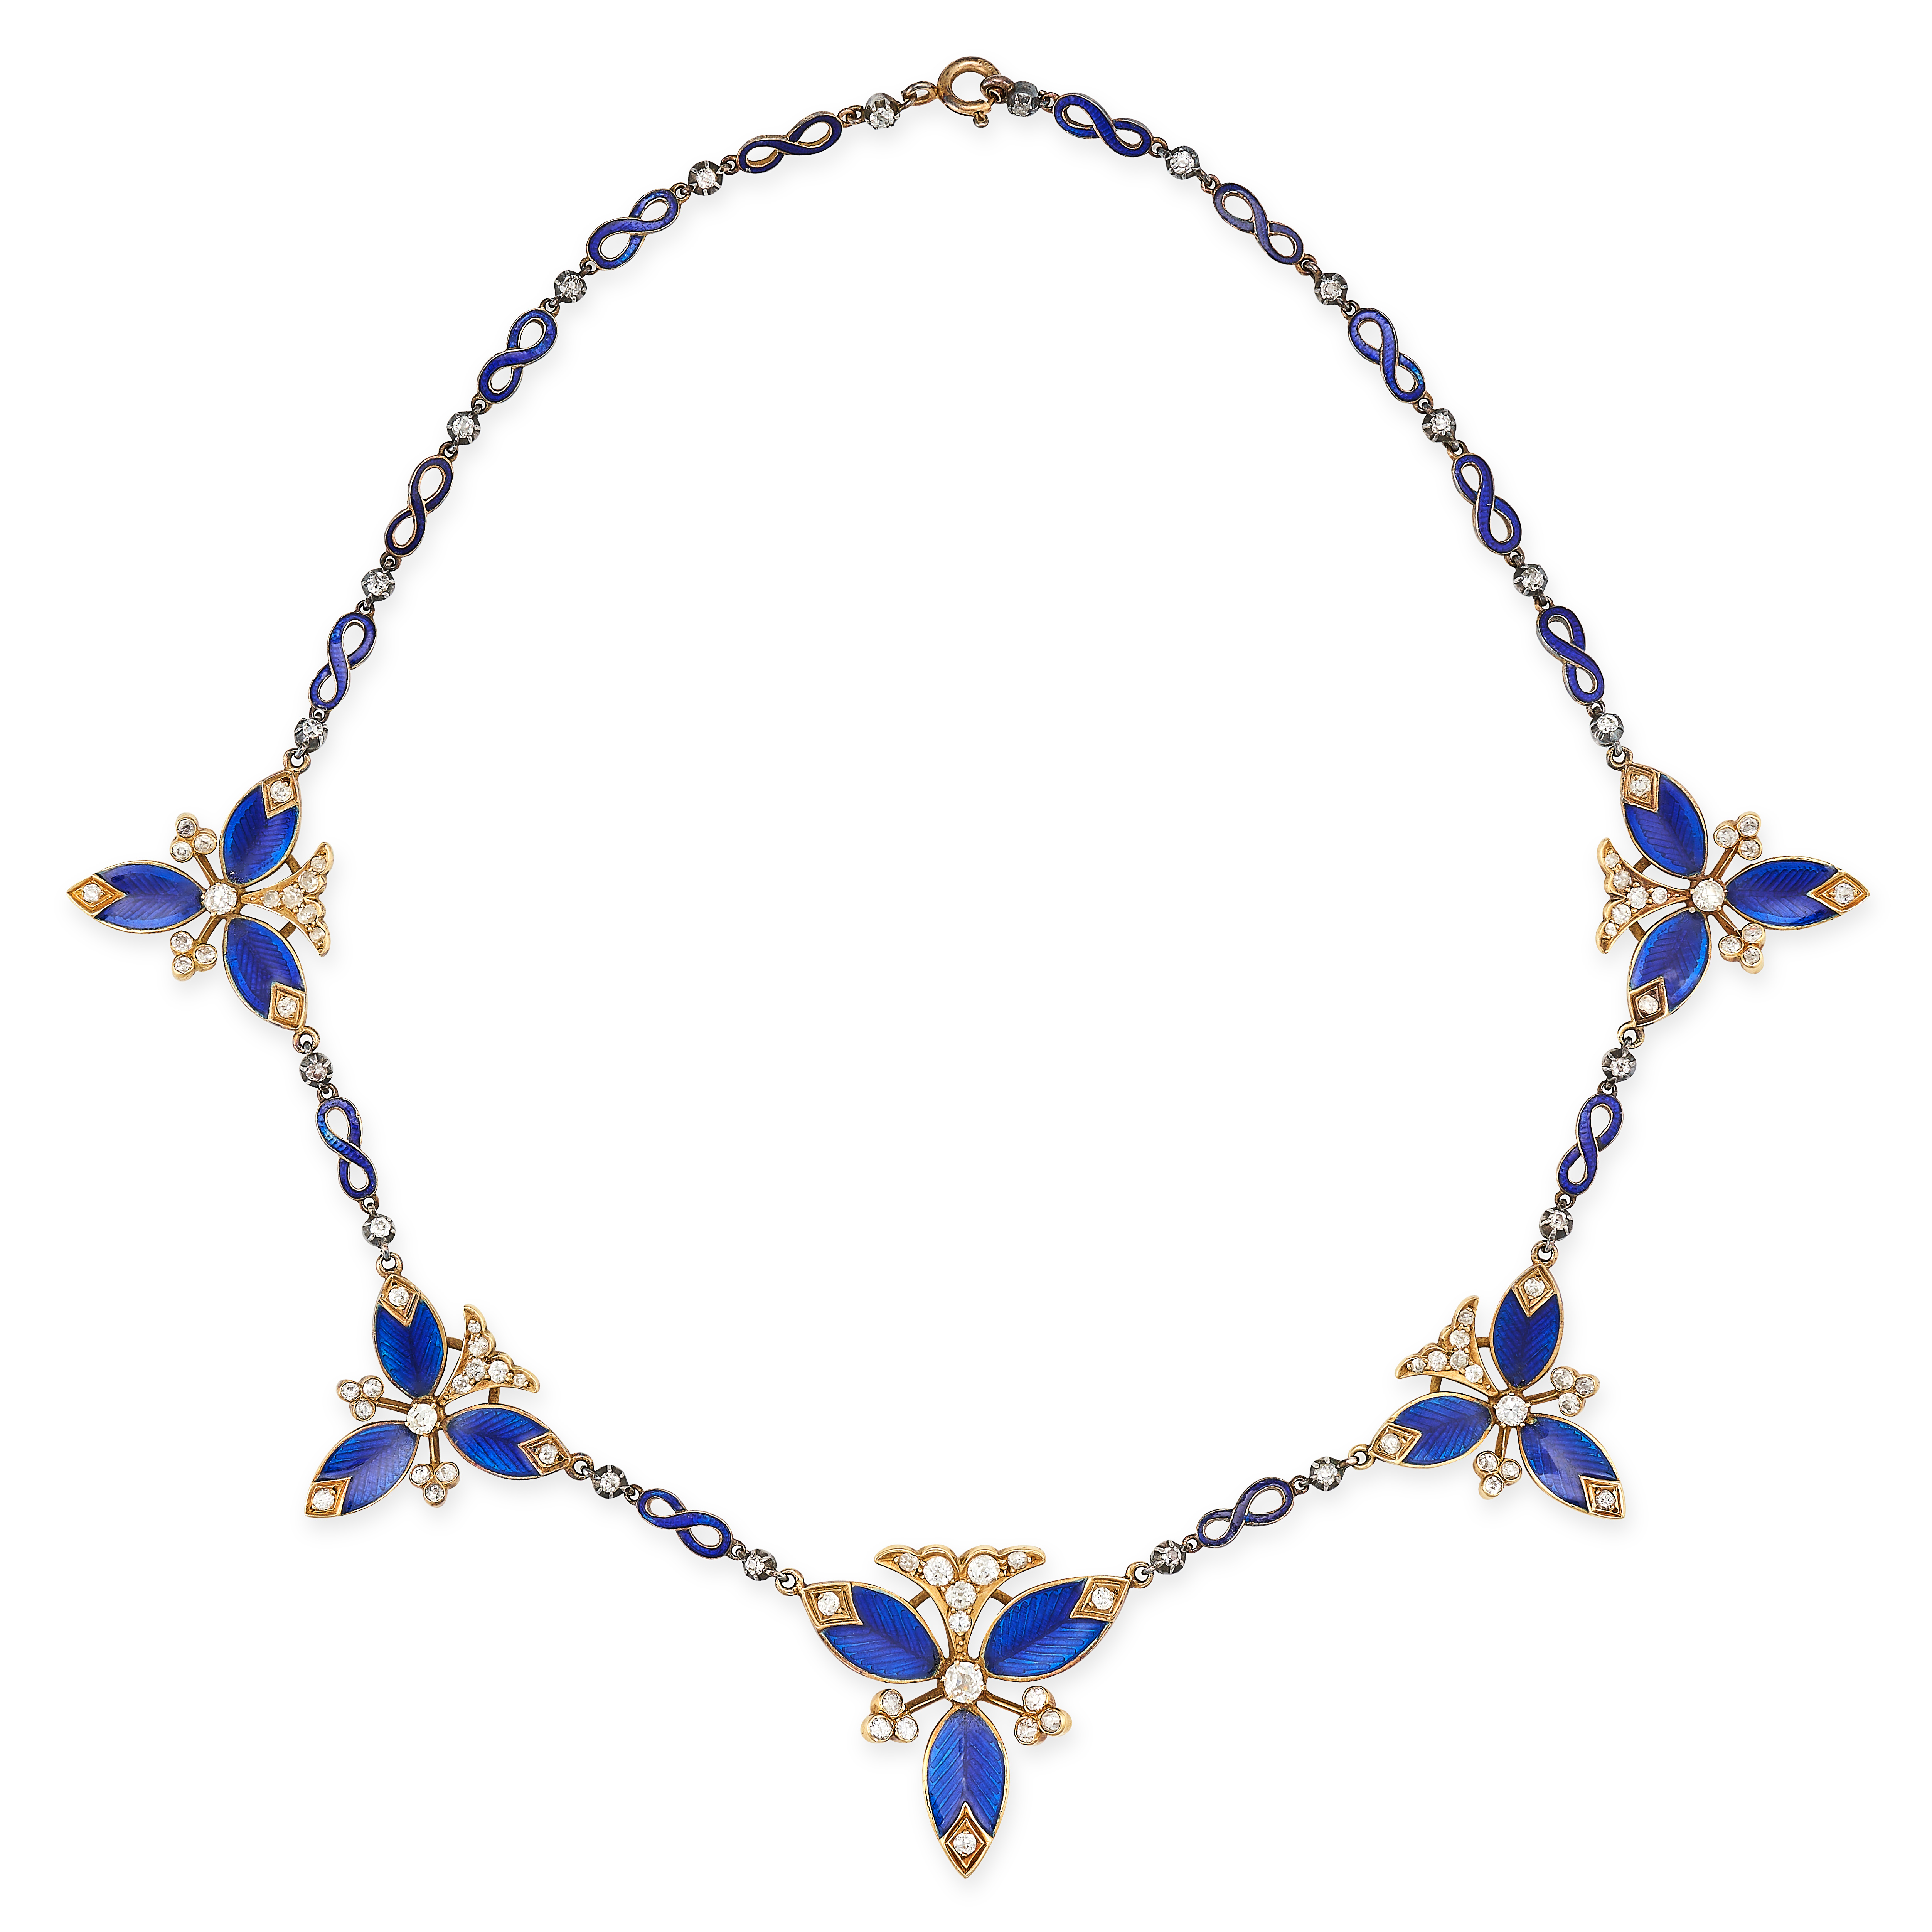 A DIAMOND AND ENAMEL NECKLACE in yellow gold, comprising a row of alternating old cut diamonds an...